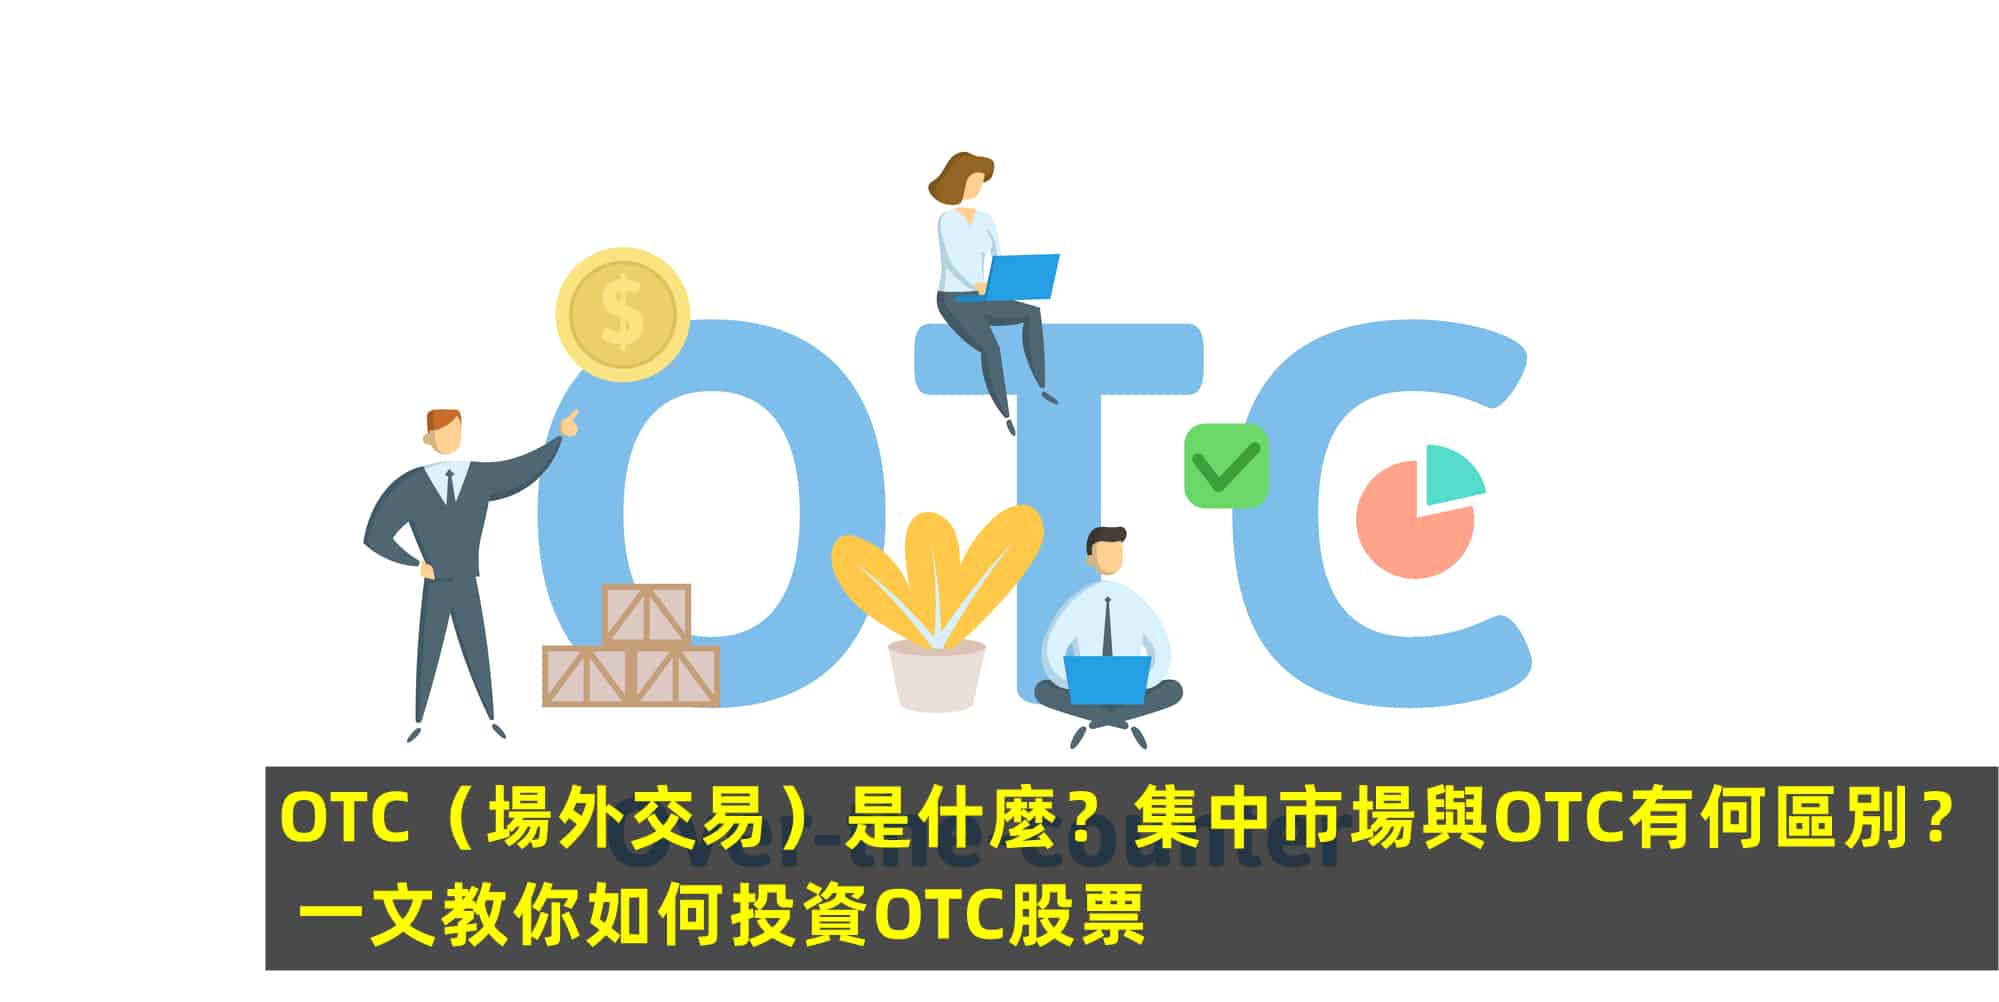 What is the otc market